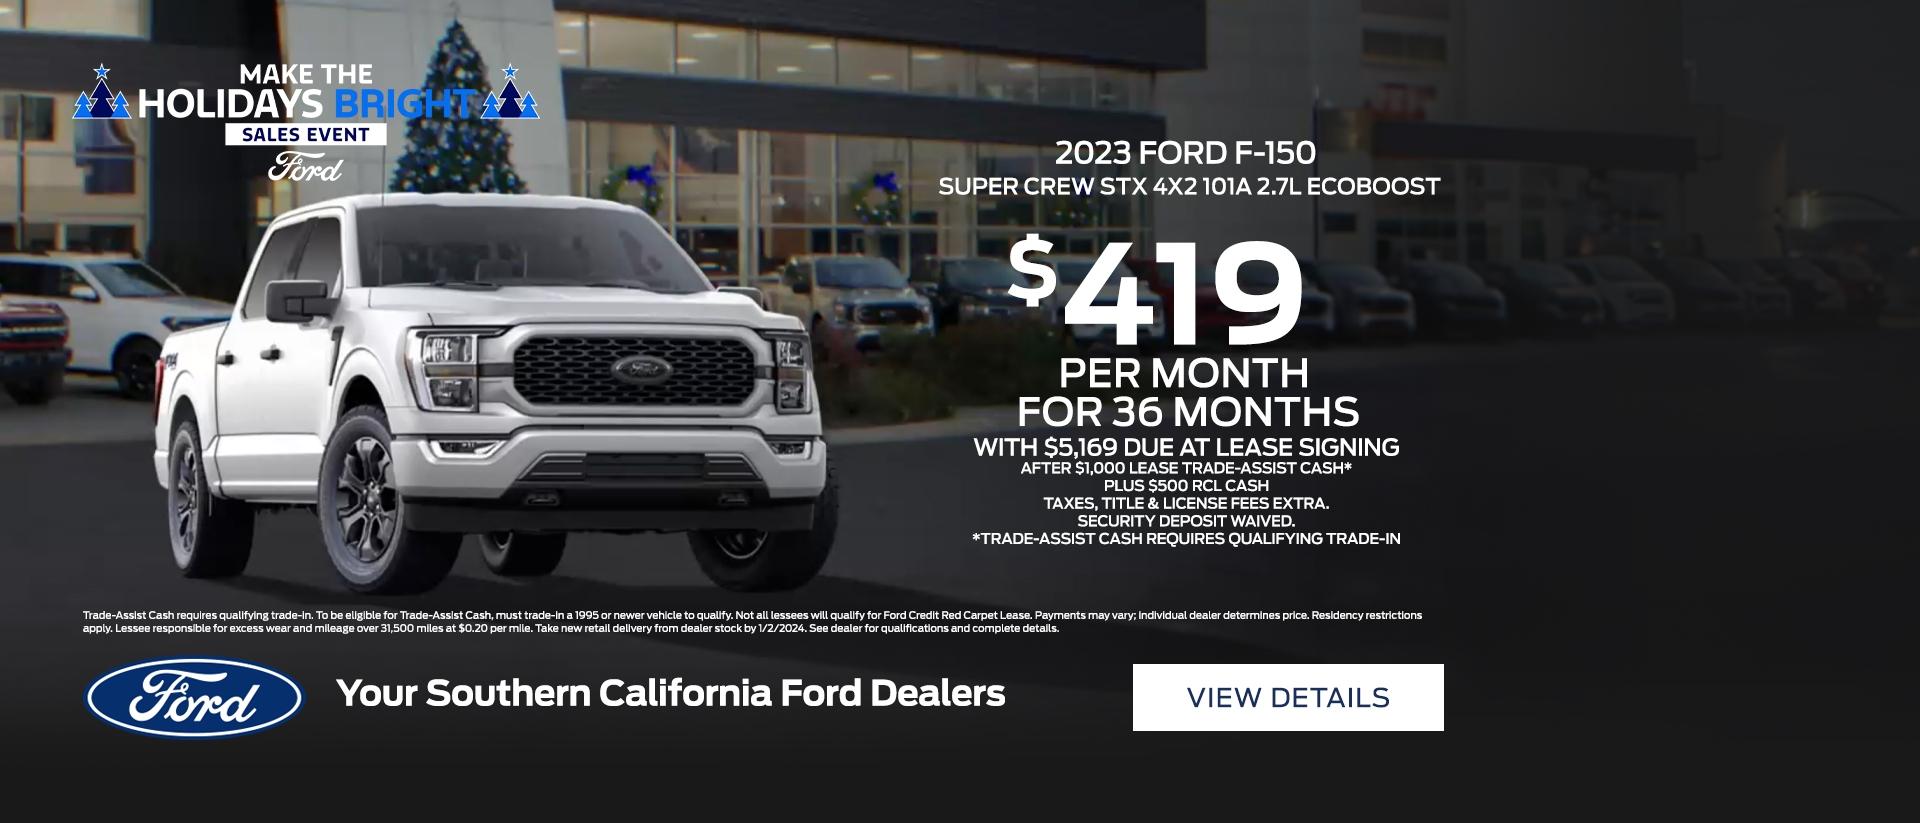 Make the Holidays Bright Sales Event | Ford F-150 Lease Offer | Southern California Ford Dealers